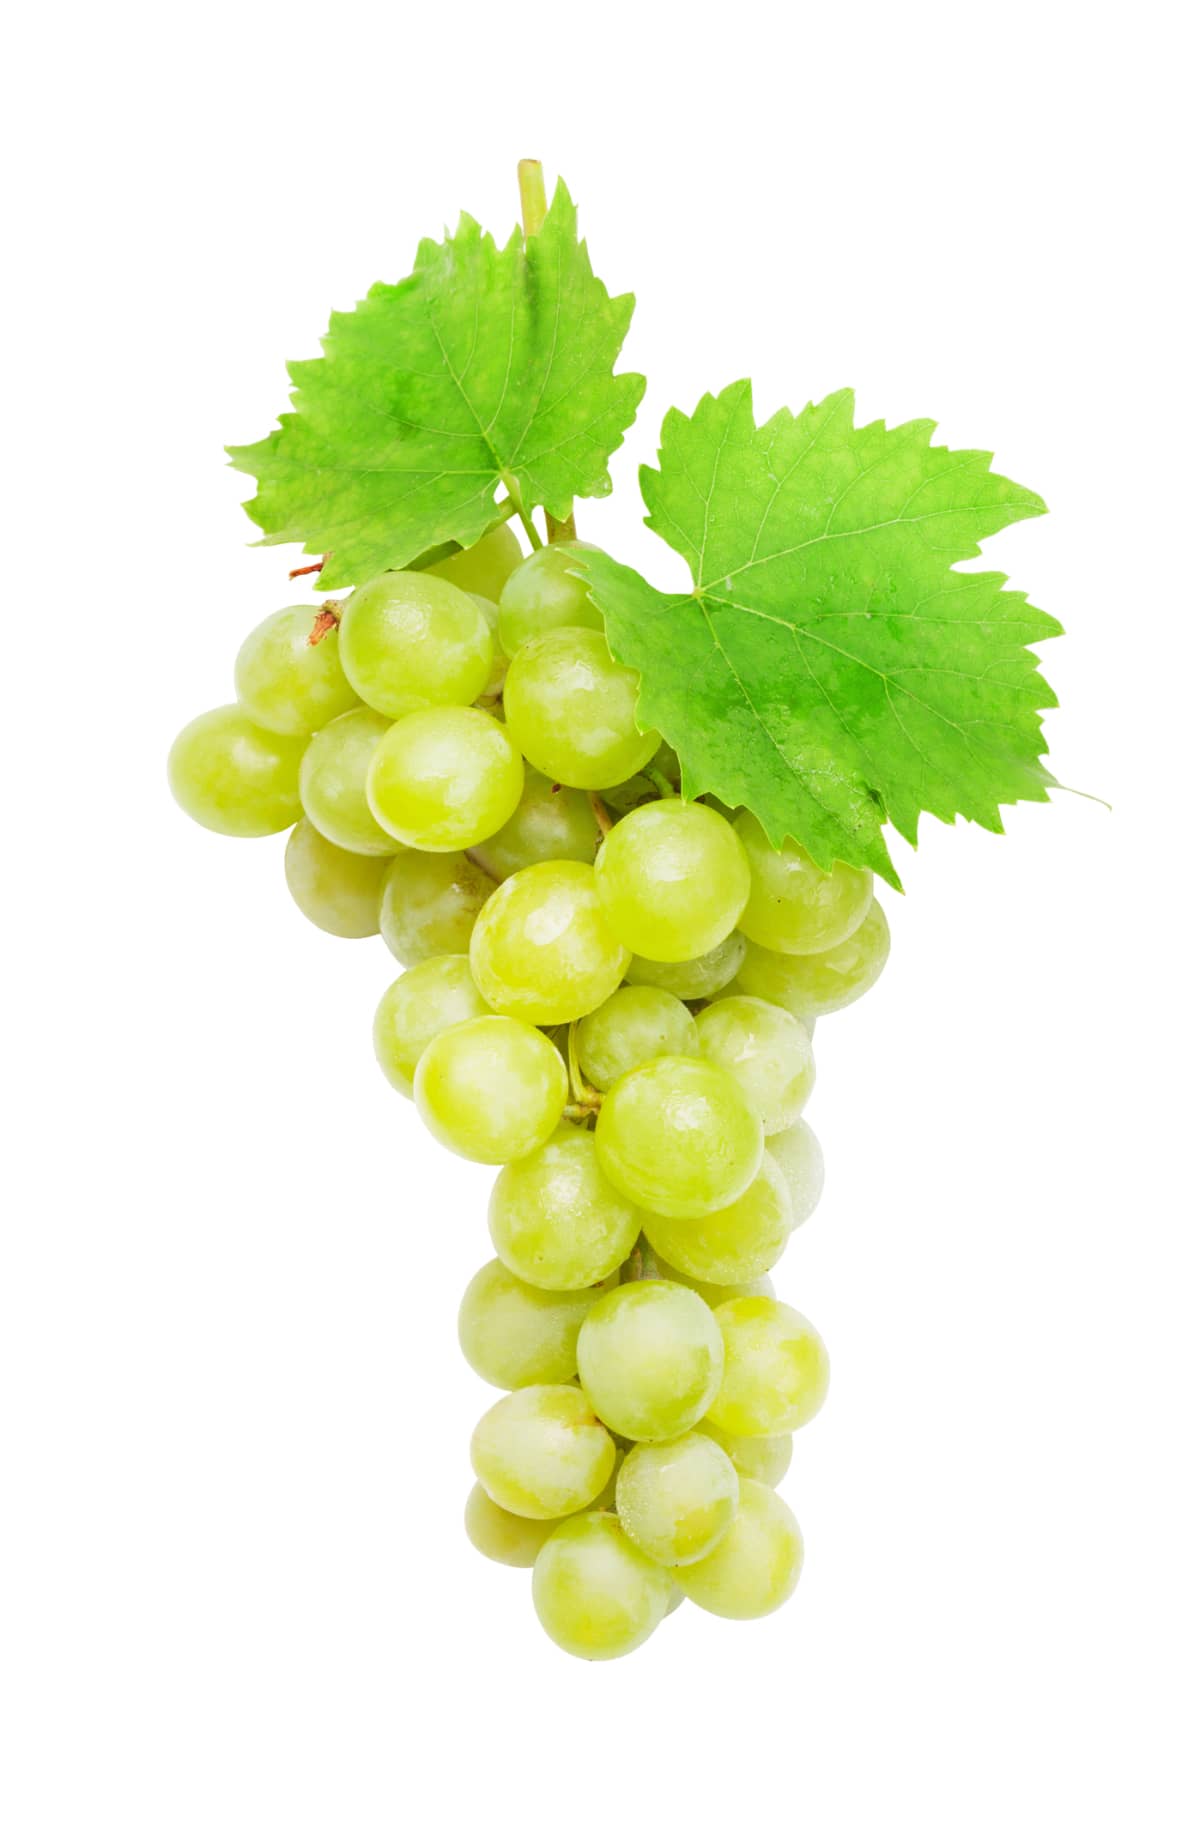 Green grapes with leaves isolated on white background